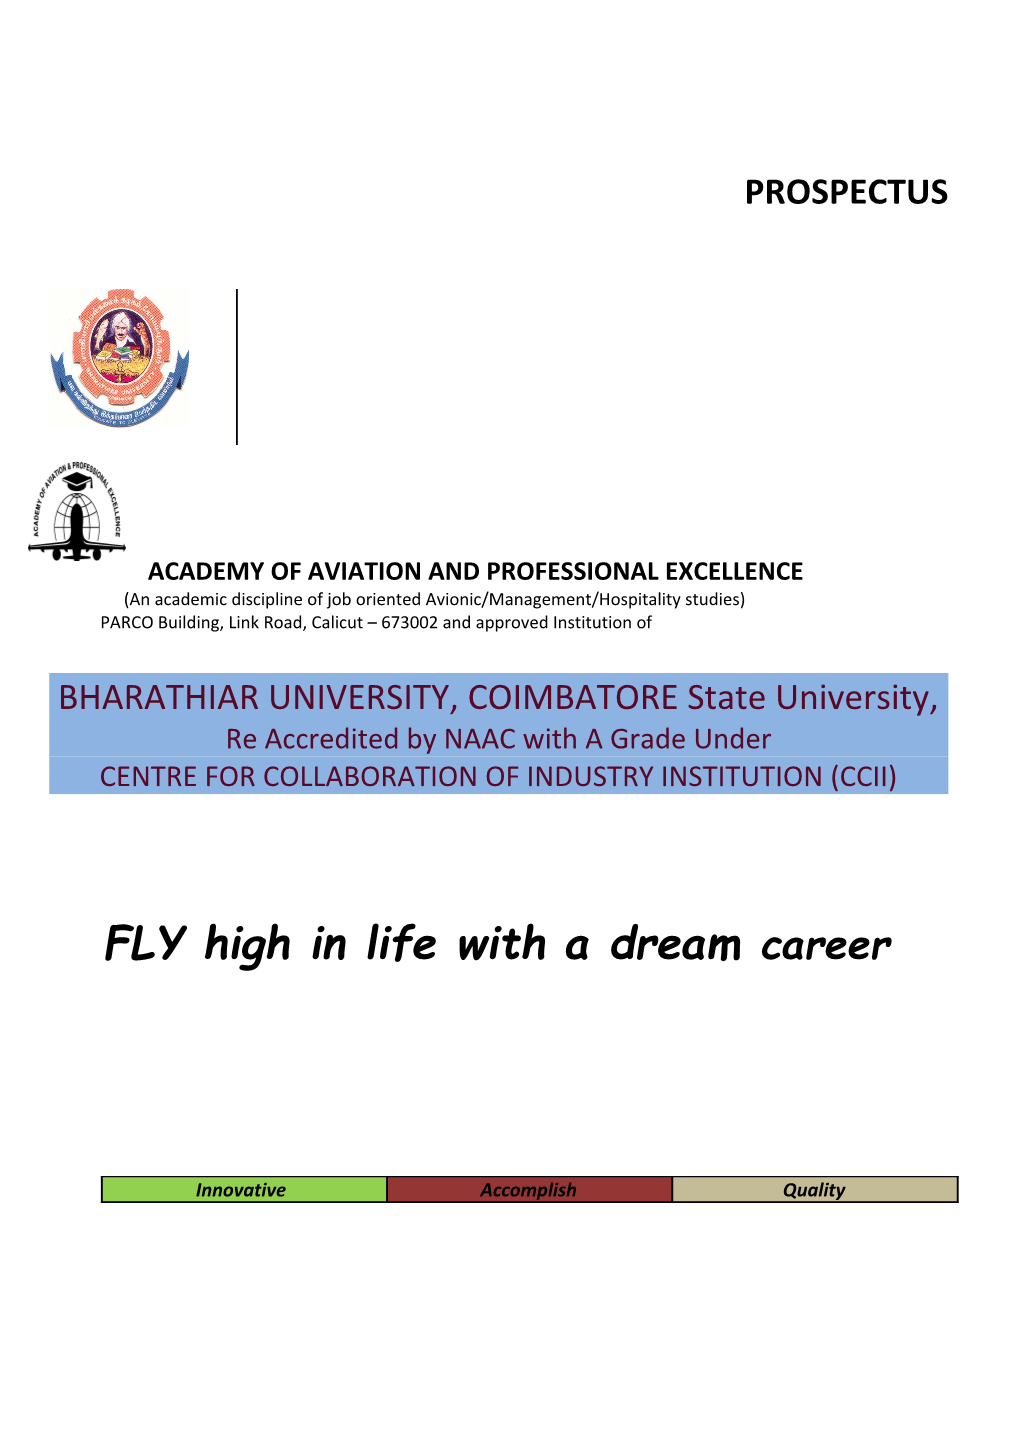 Academy of Aviation and Professional Excellence